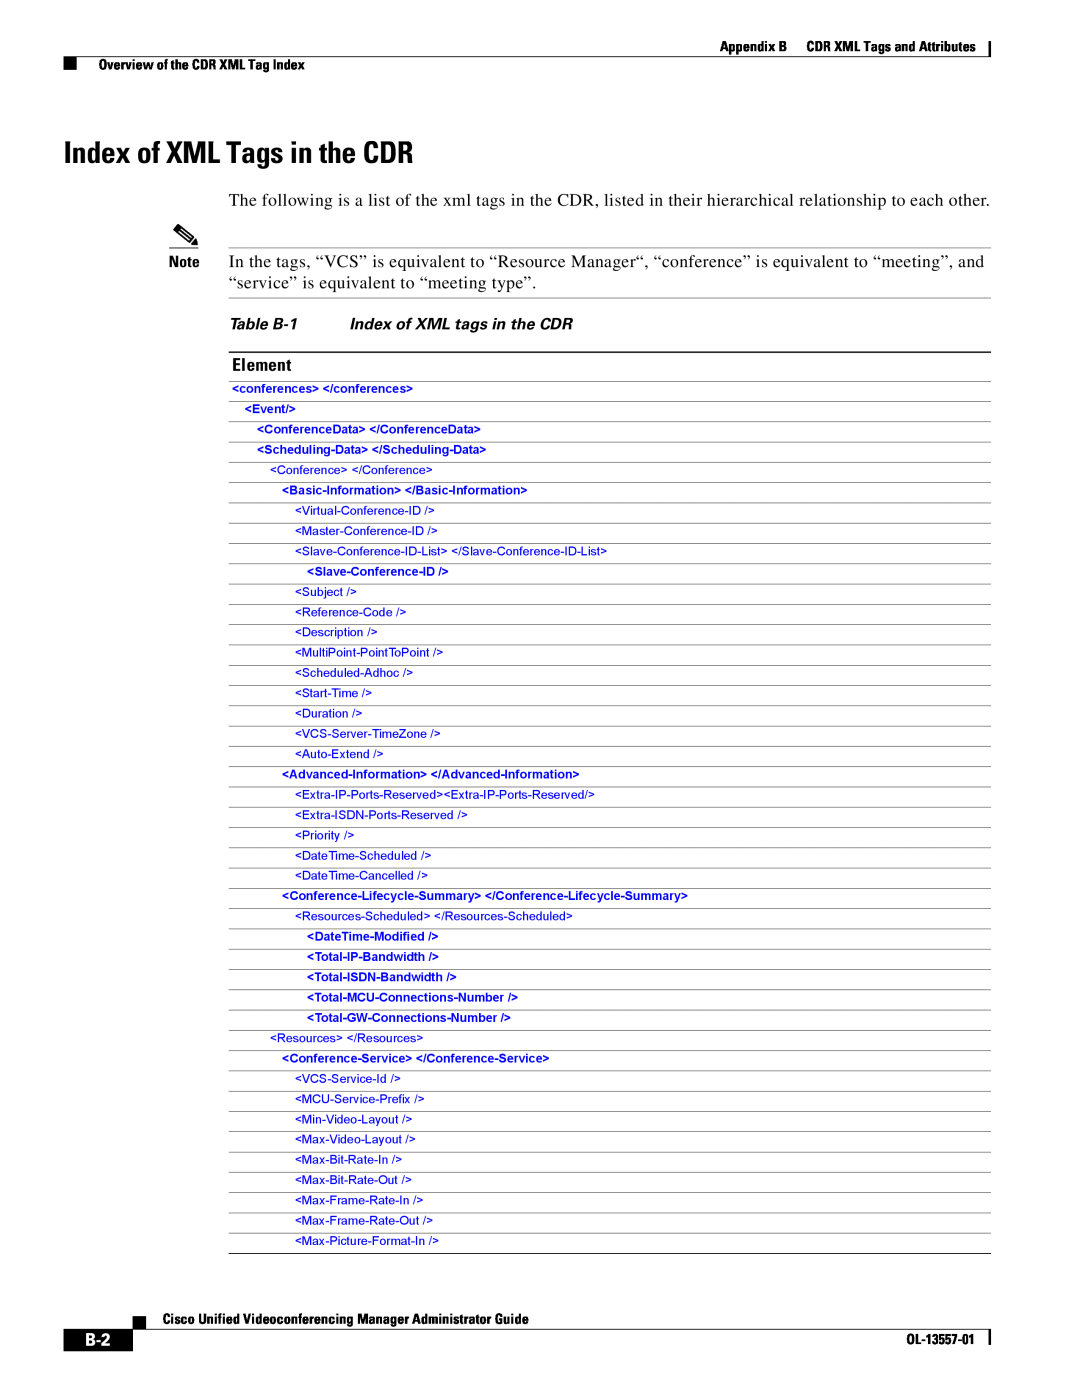 Cisco Systems CDR XML appendix Index of XML Tags in the CDR, Element 